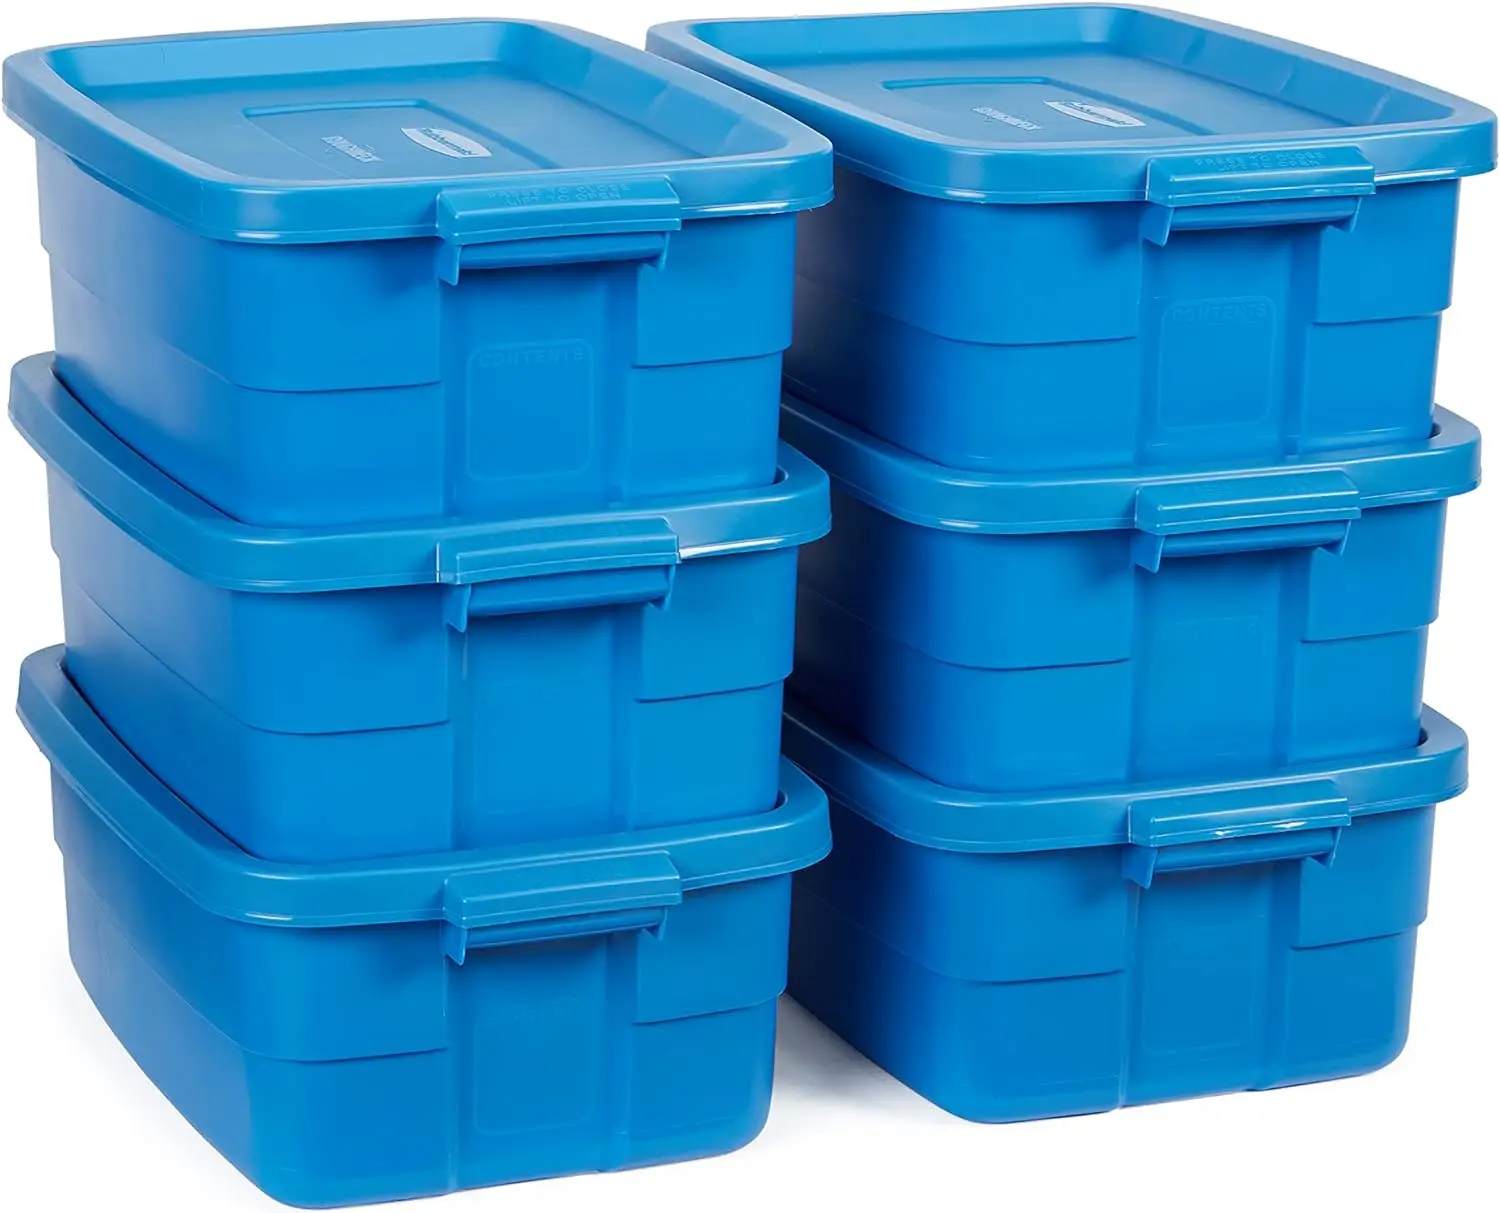 

10 Gallon Storage Totes, Pack of 6, Durable Stackable Storage Containers with Lids, Nestable Plastic Storage Bins for Tools